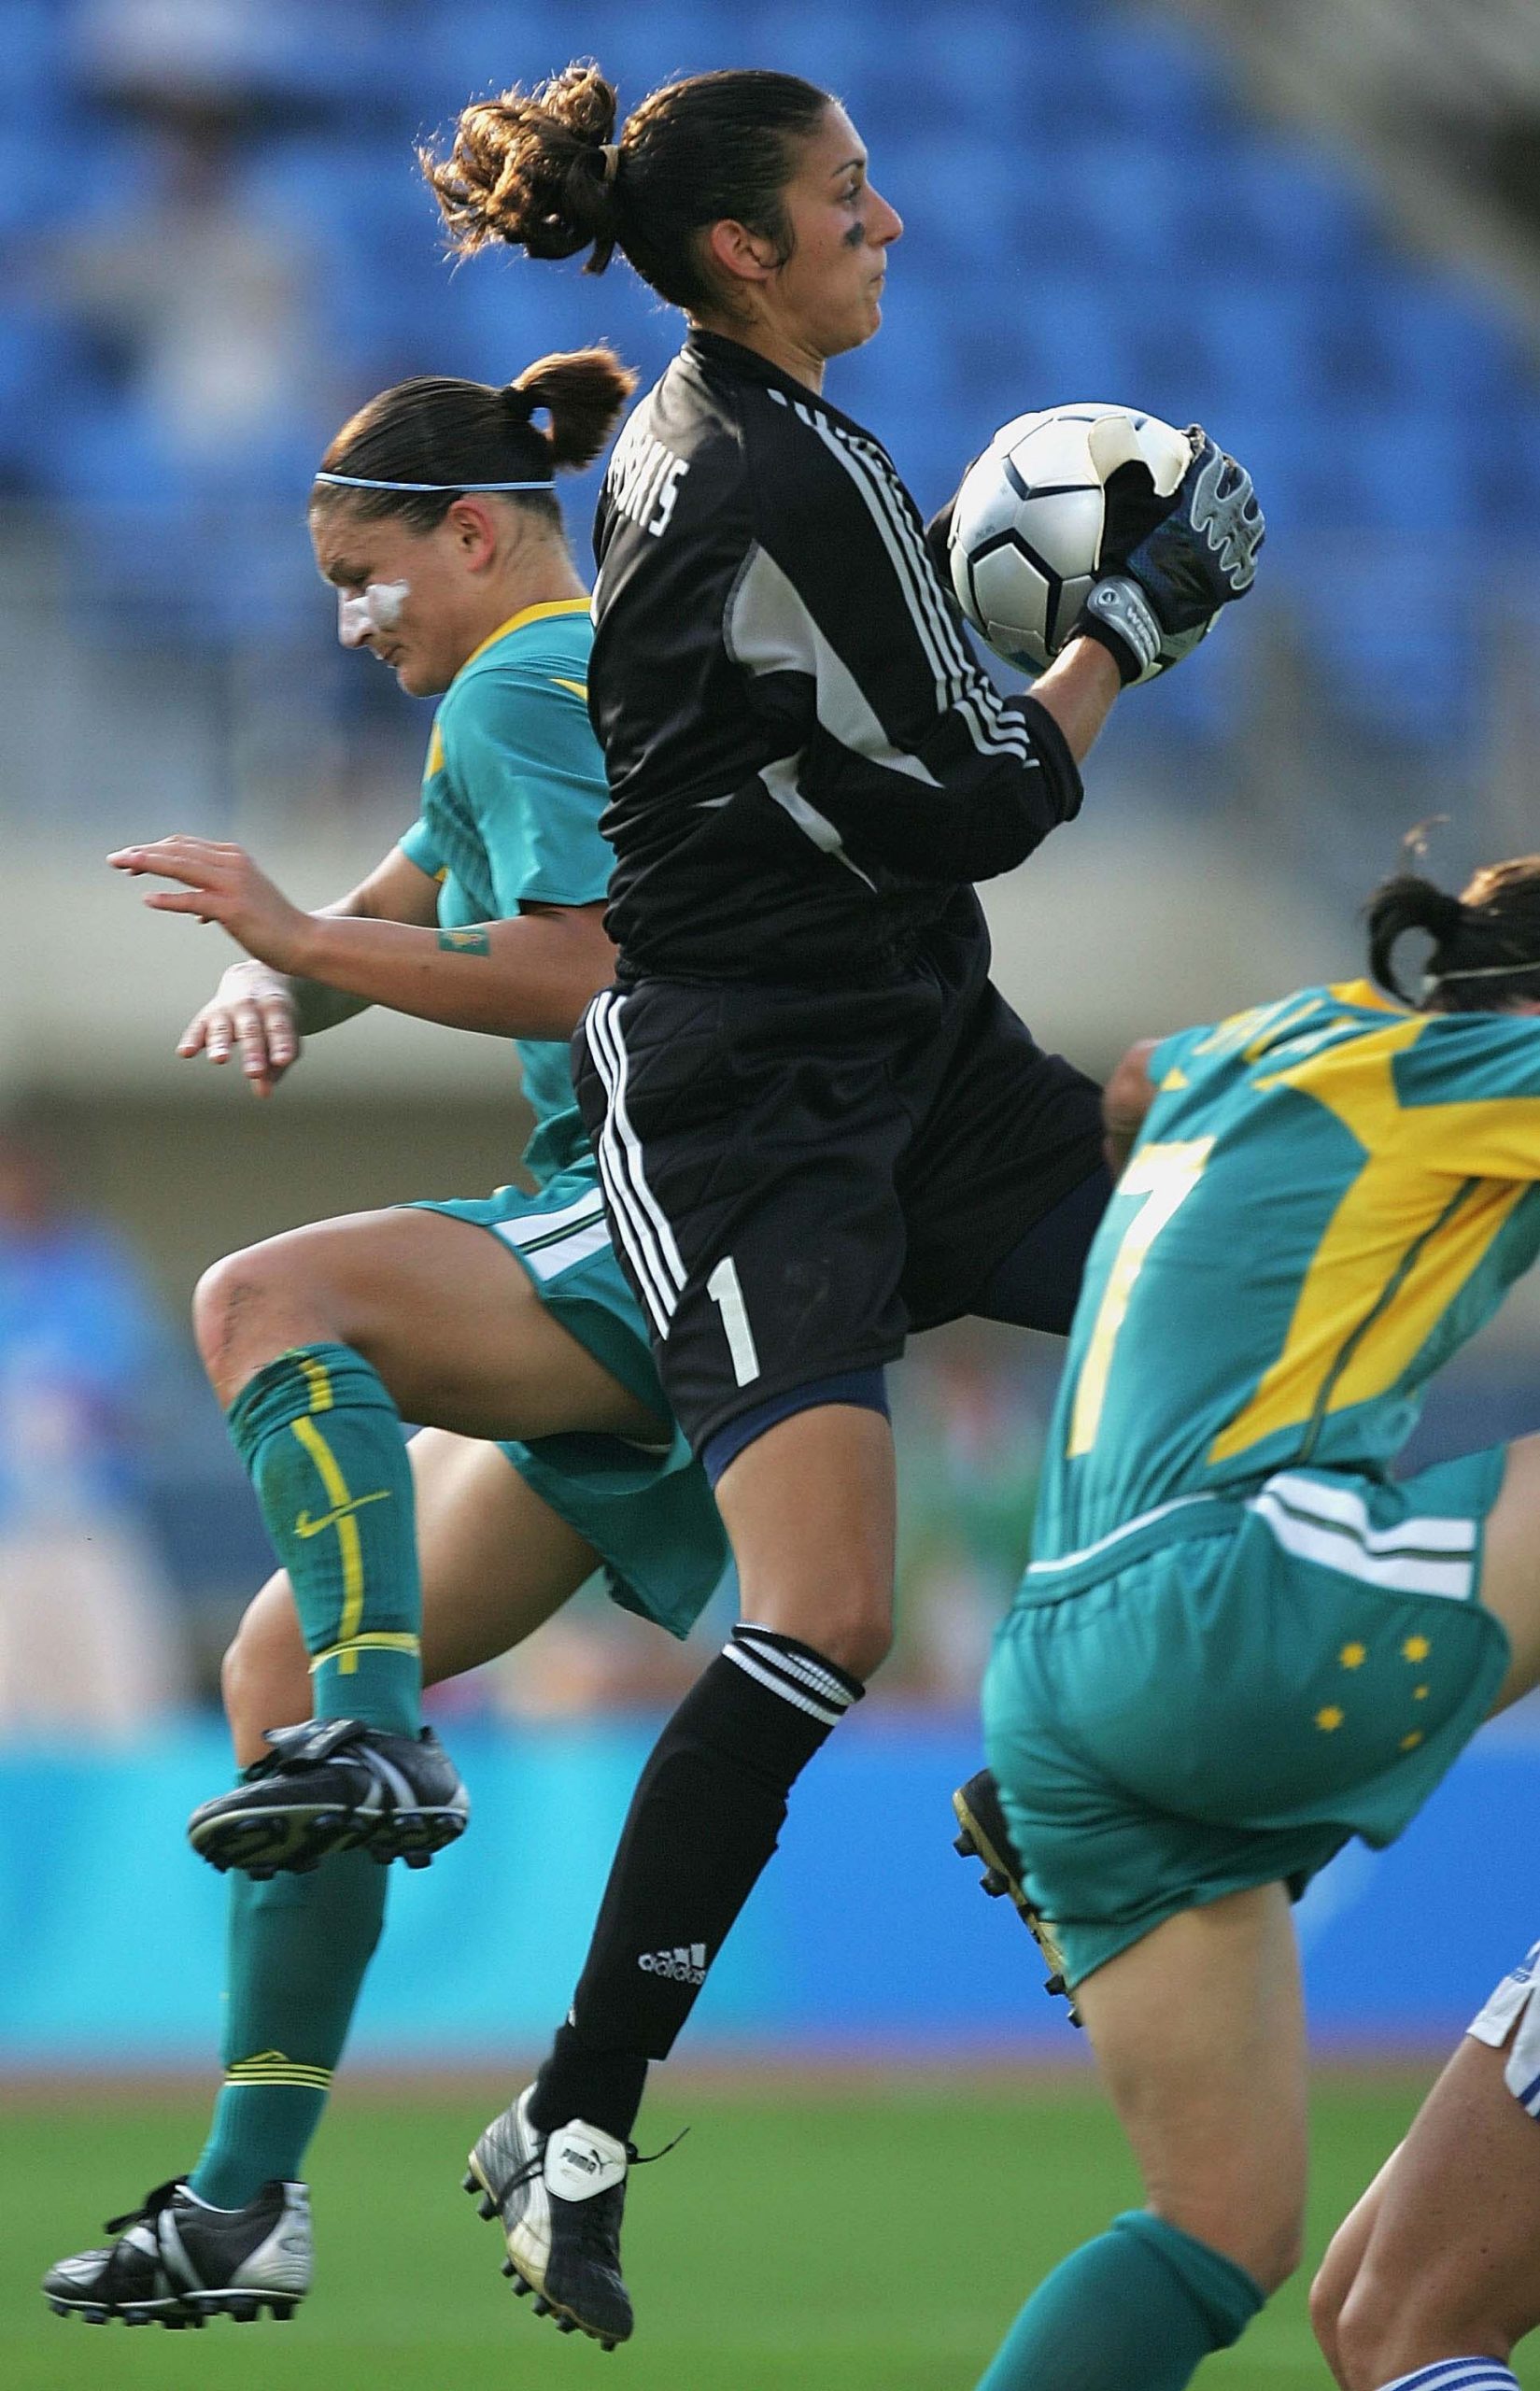 Yatrakis goalkeeping for Greece against Australia during the Athens 2004 Summer Olympic Games.